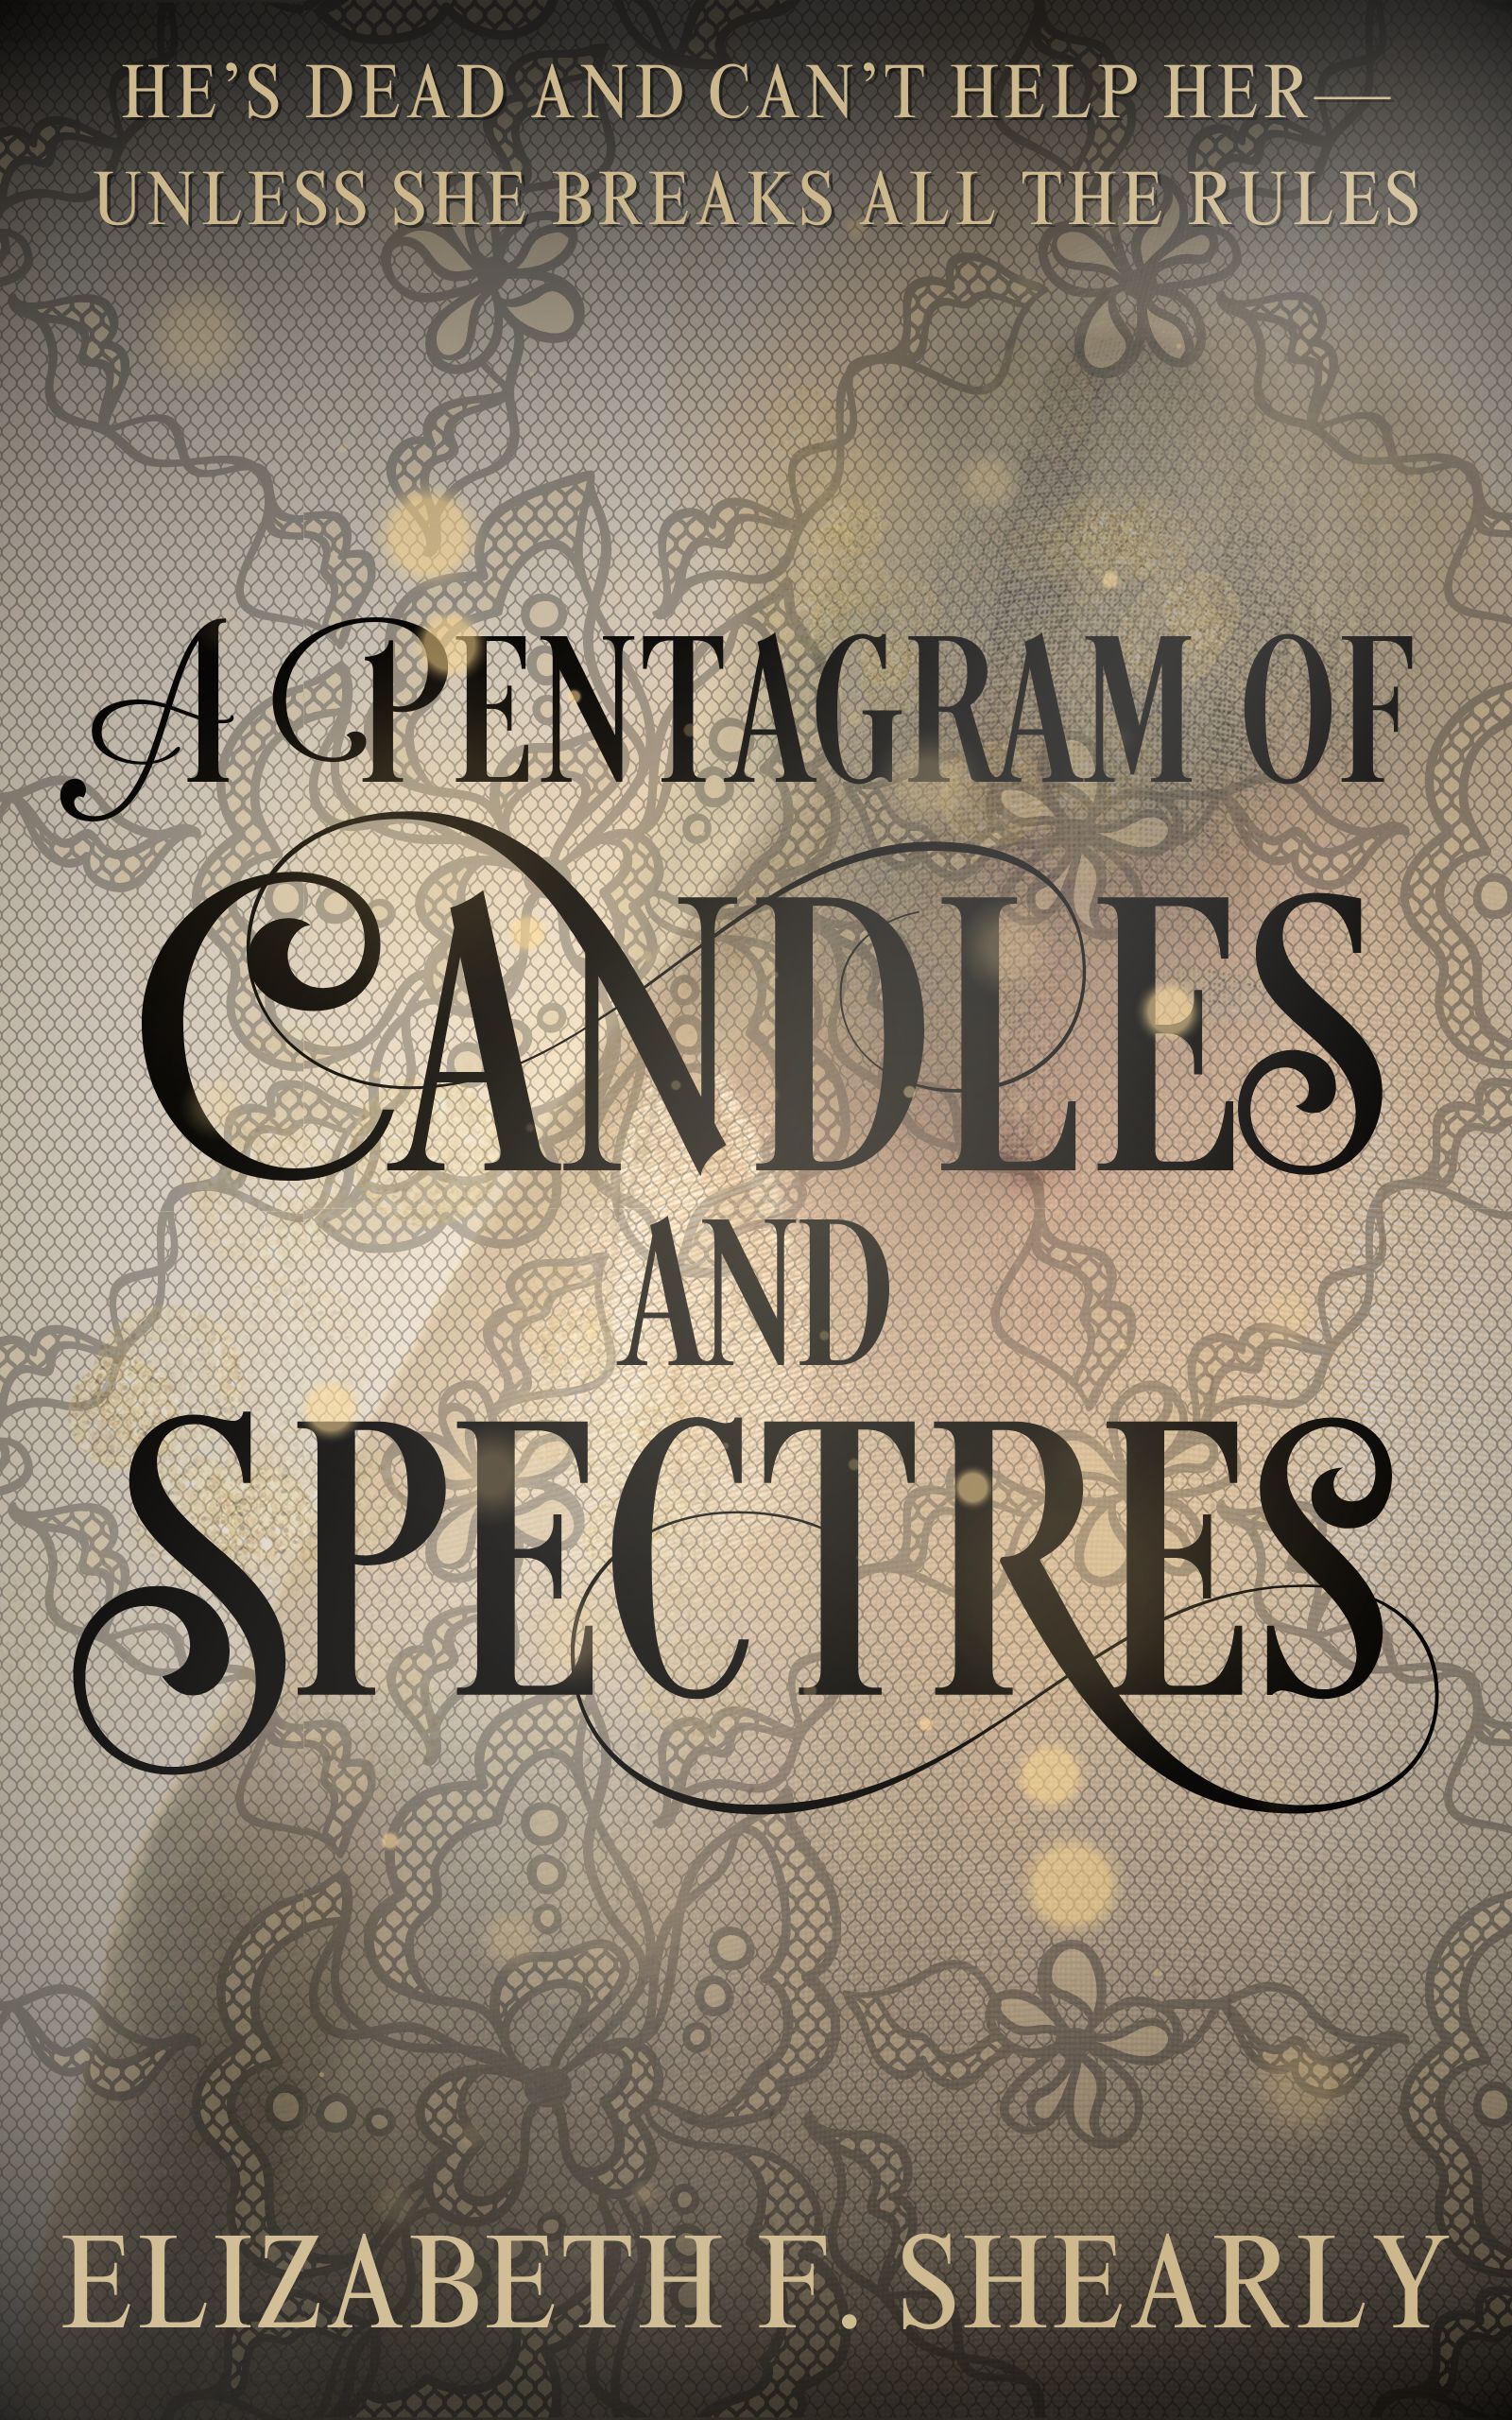 A Pentagram Of Candles and Spectres by Elizabeth F. Shearly